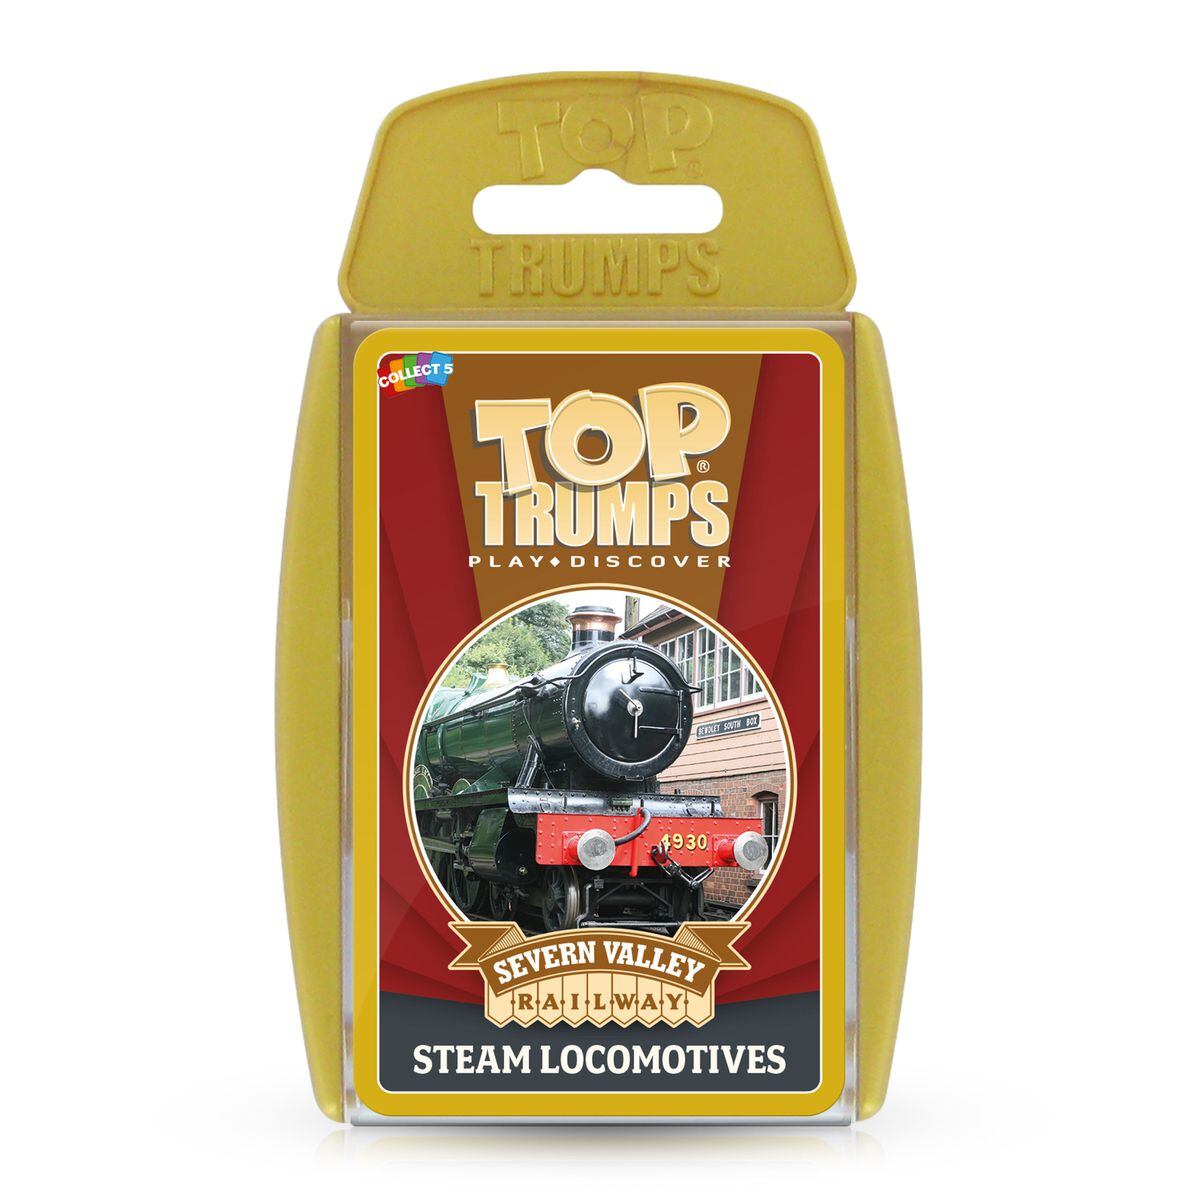 The new Top Trumps designed by Severn Valley Railway